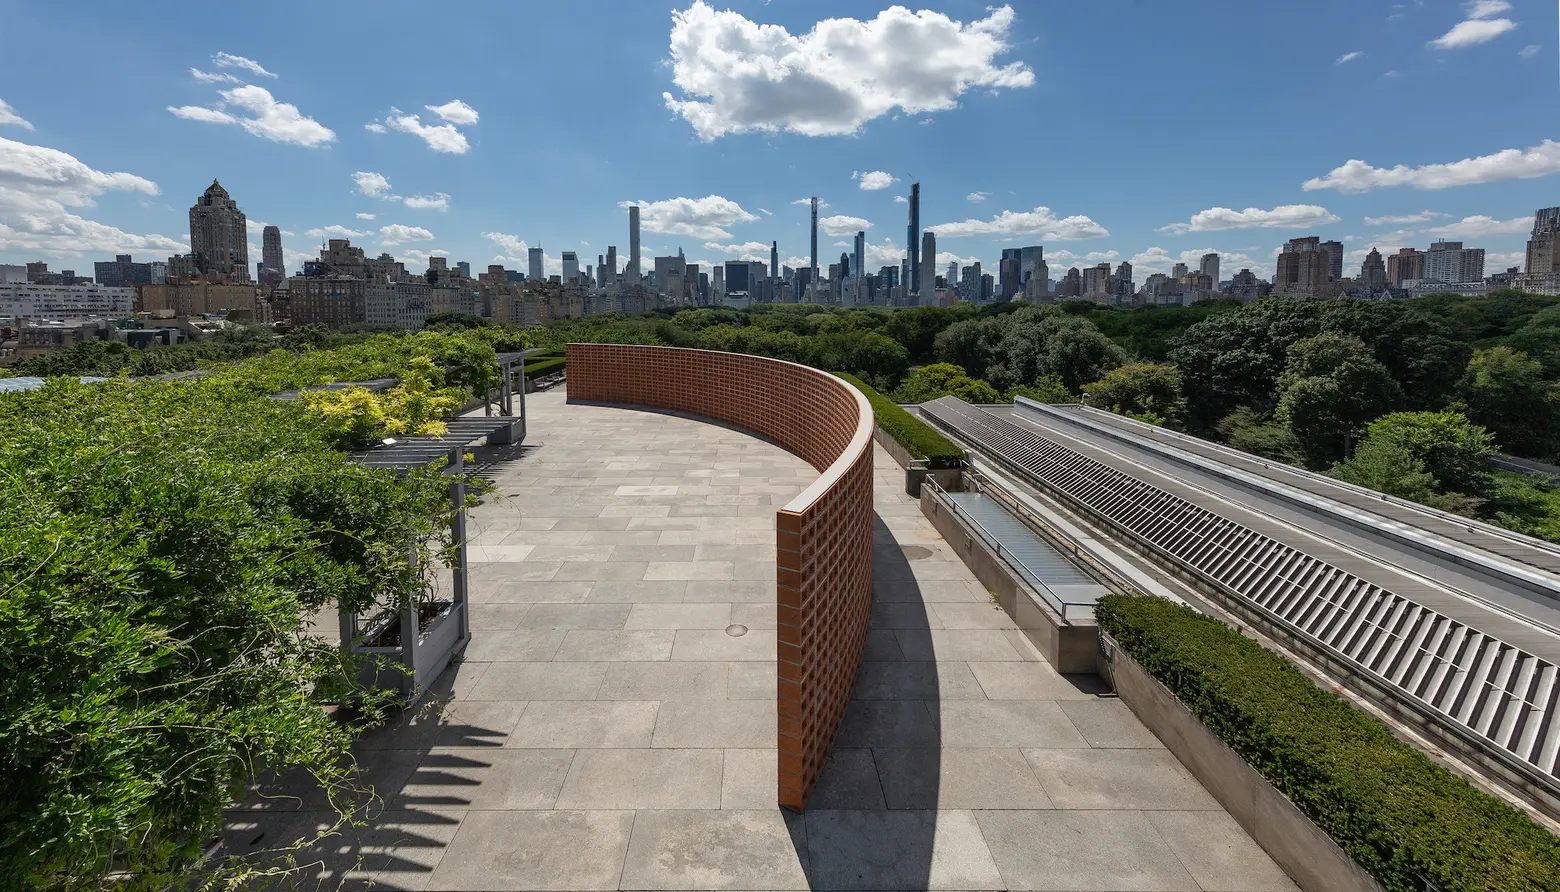 This year’s Met roof garden installation tackles ‘the wall’